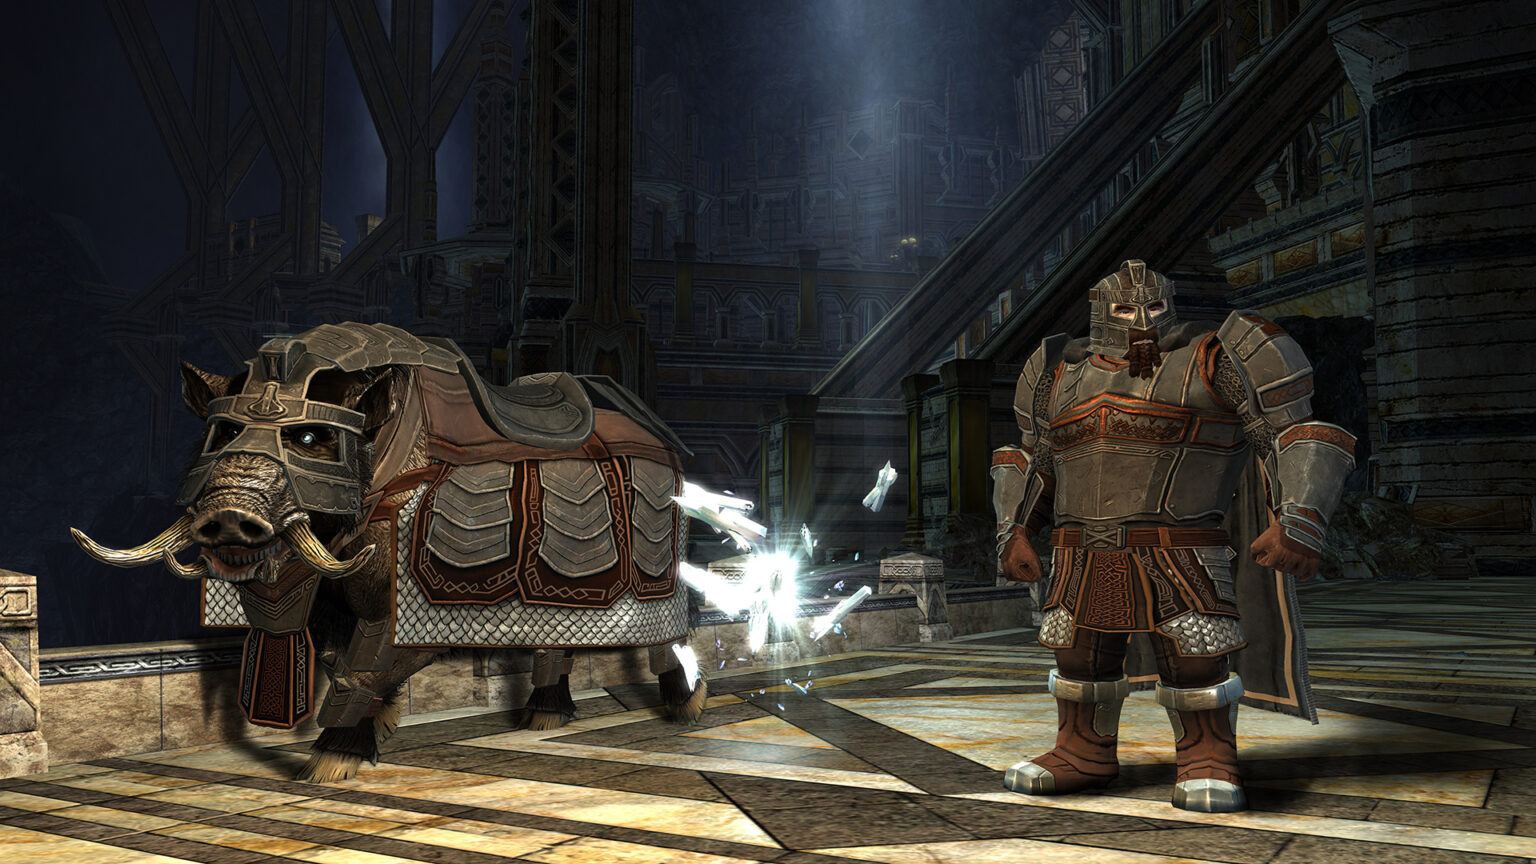 Patch 30.3 is Live in LOTRO Bringing With it the Brawler & Legendary